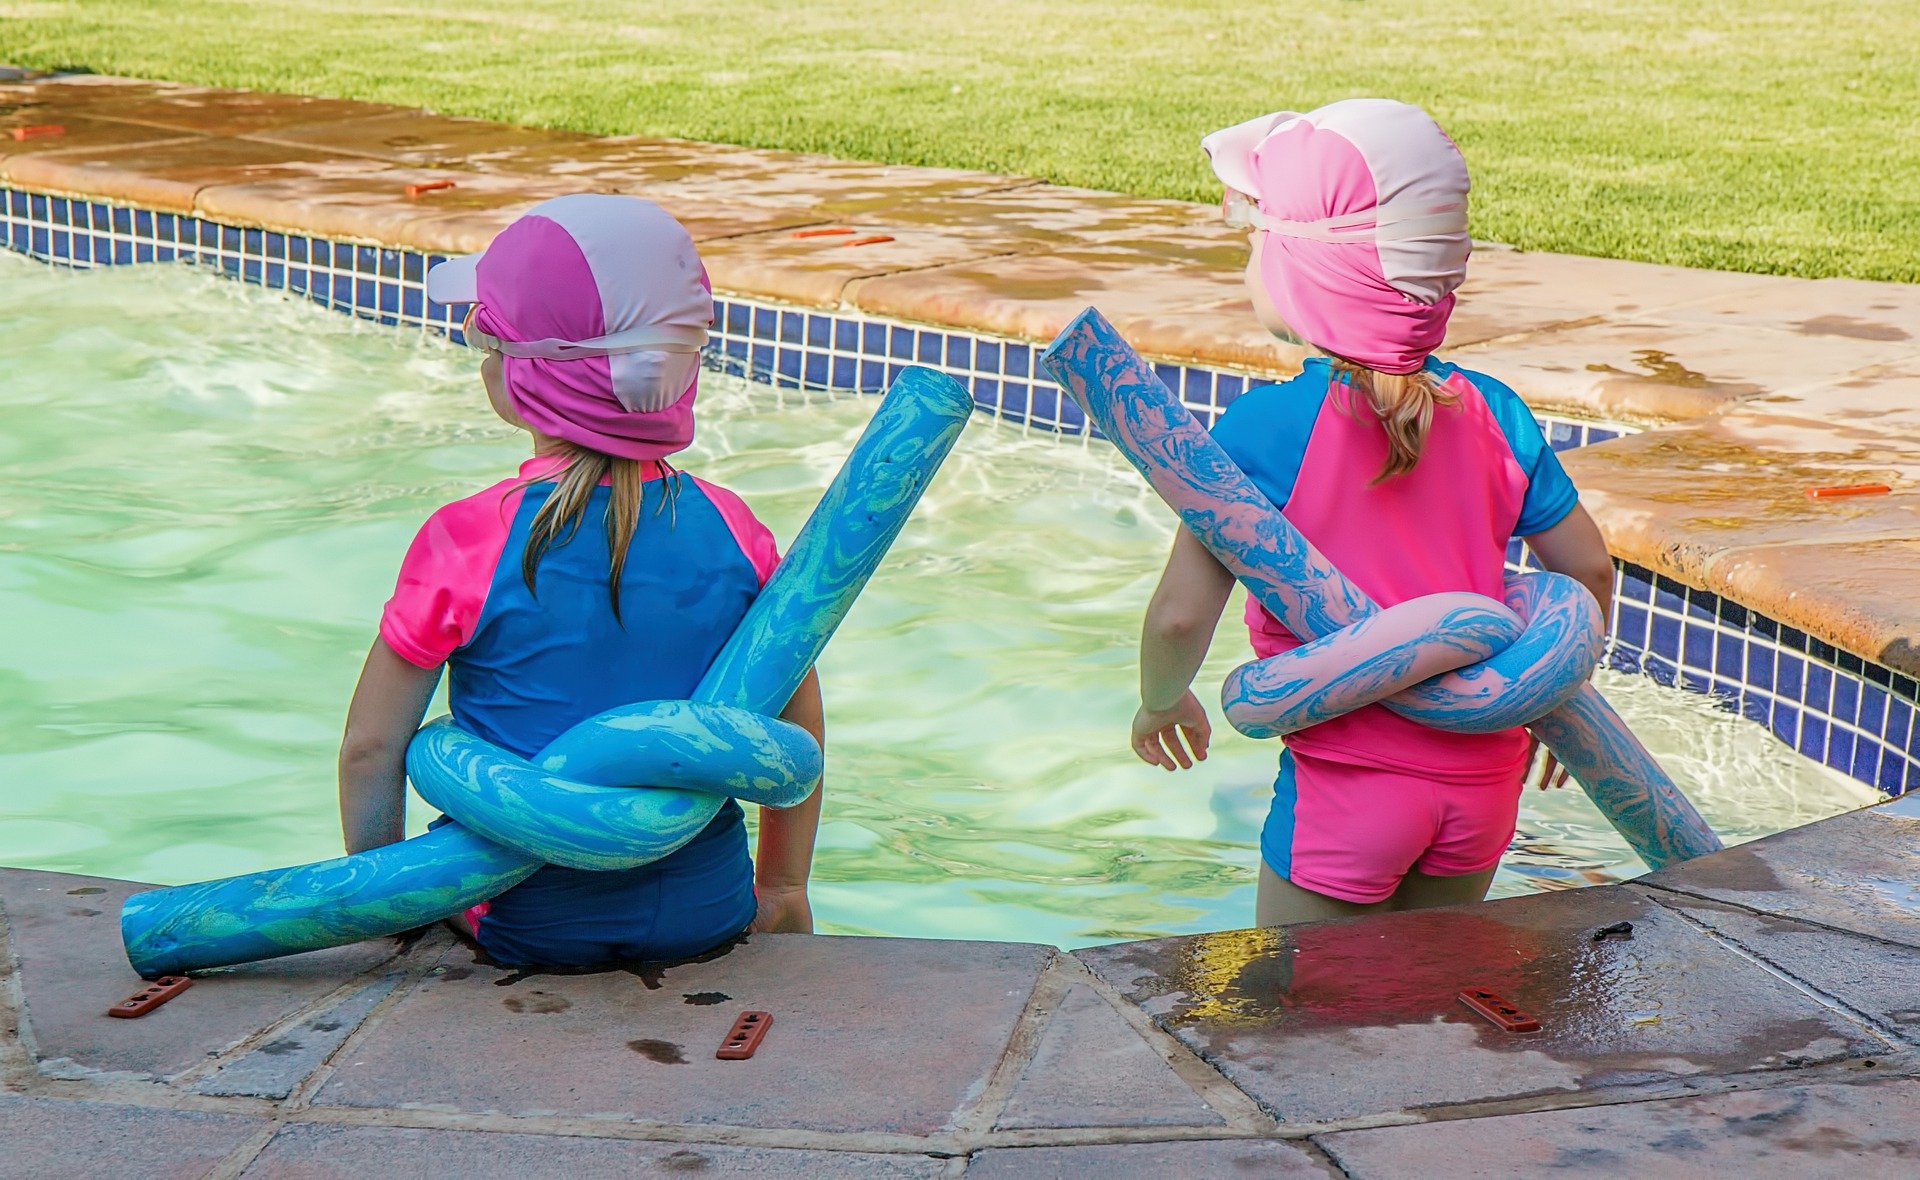 Vigilance Matters: Why Watching Your Kids Around Water and Pools Is Non-Negotiable